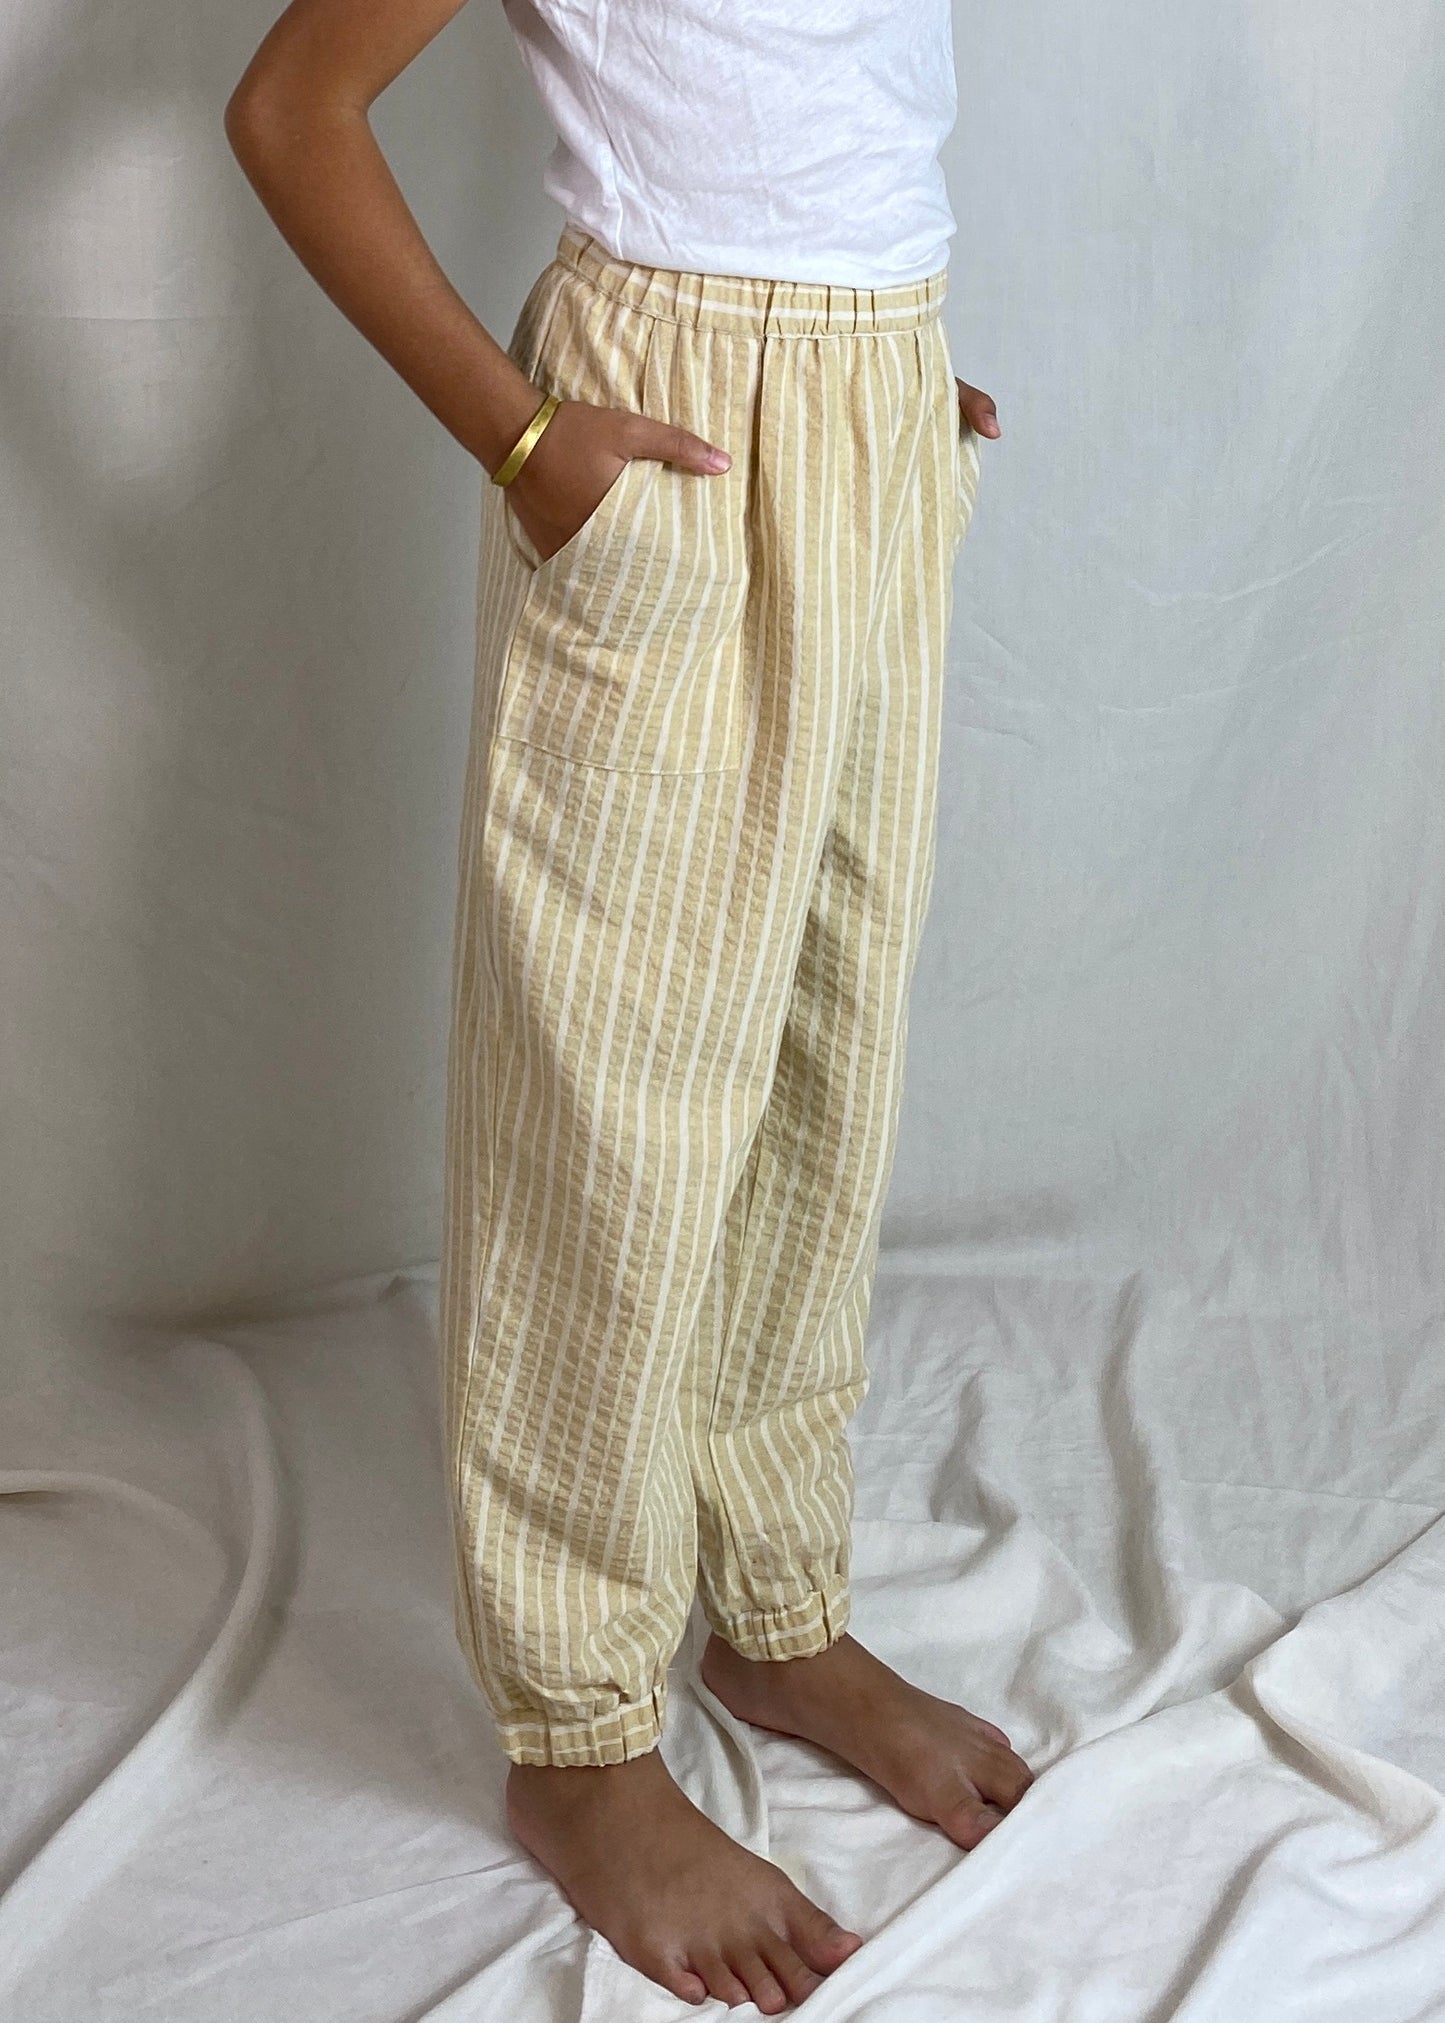 Riang Pants In Striped Yellow